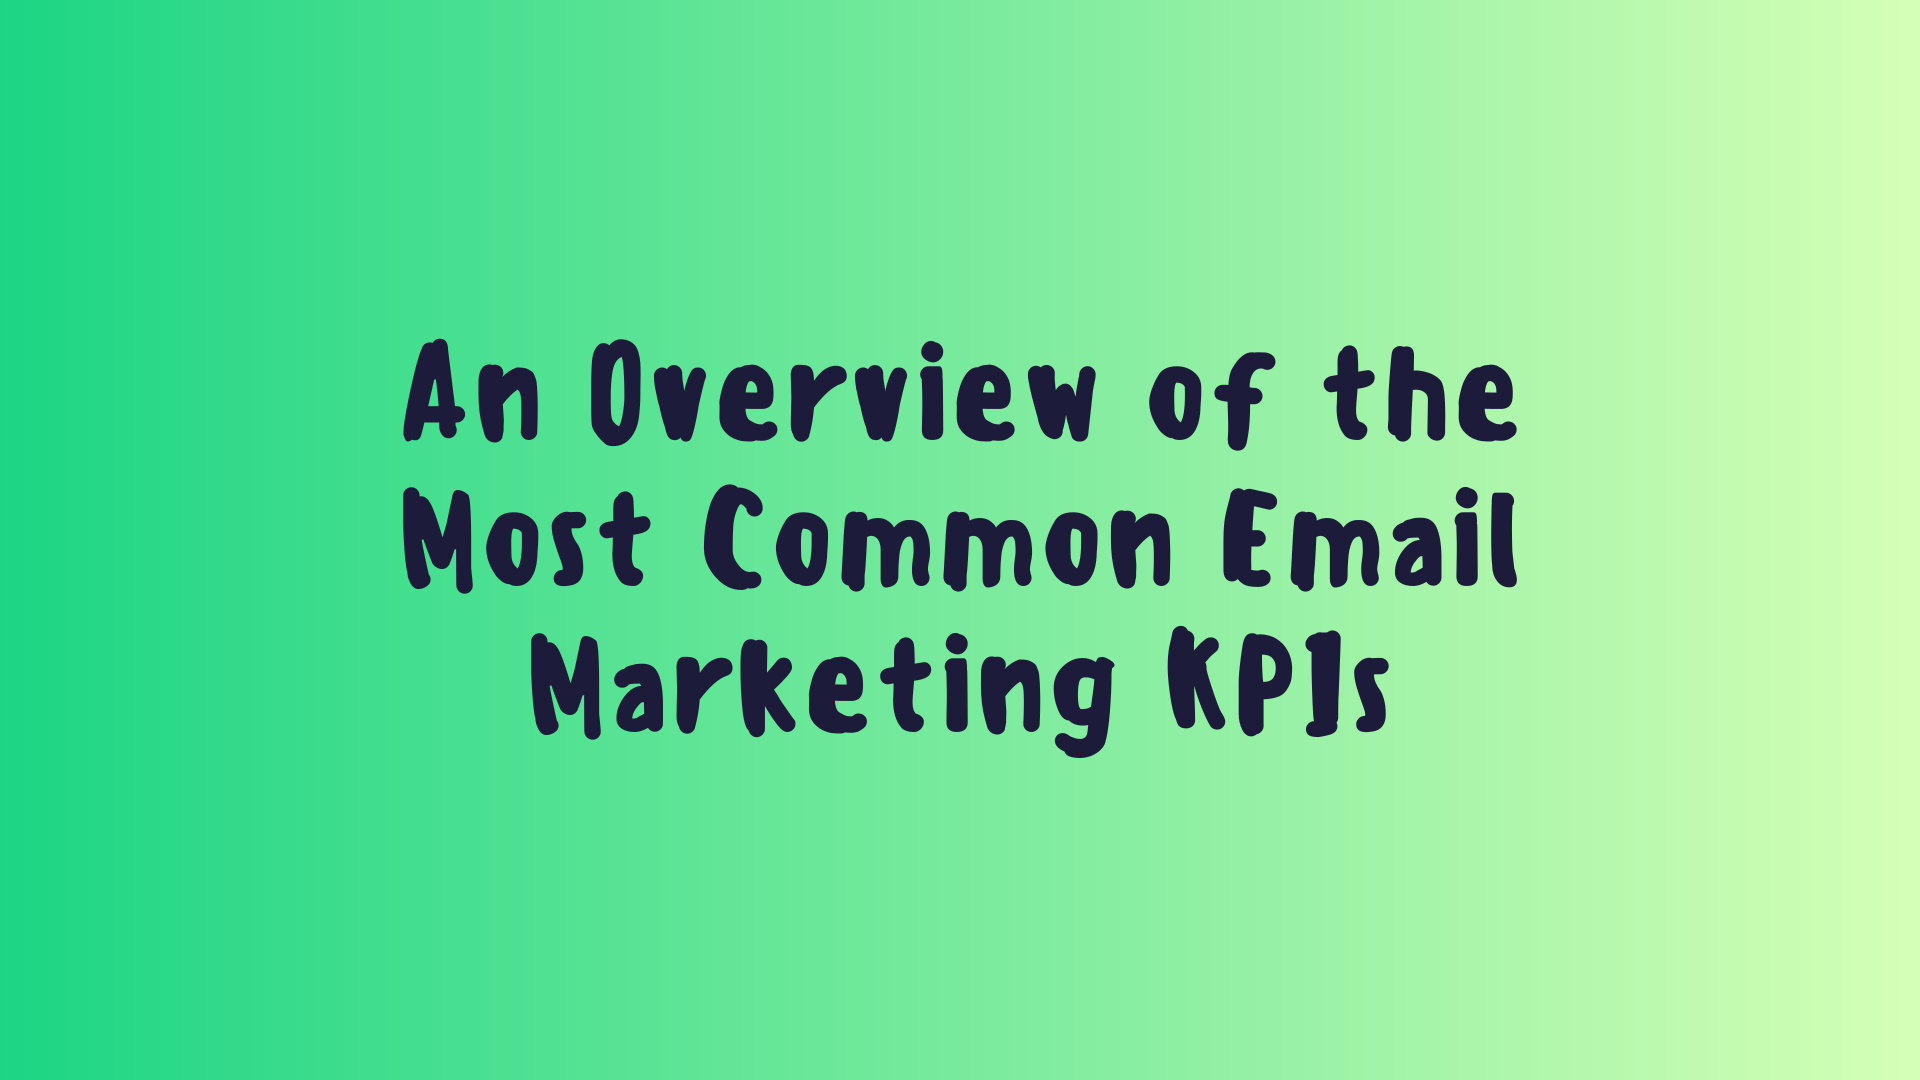 An Overview of the Most Common Email Marketing KPIs